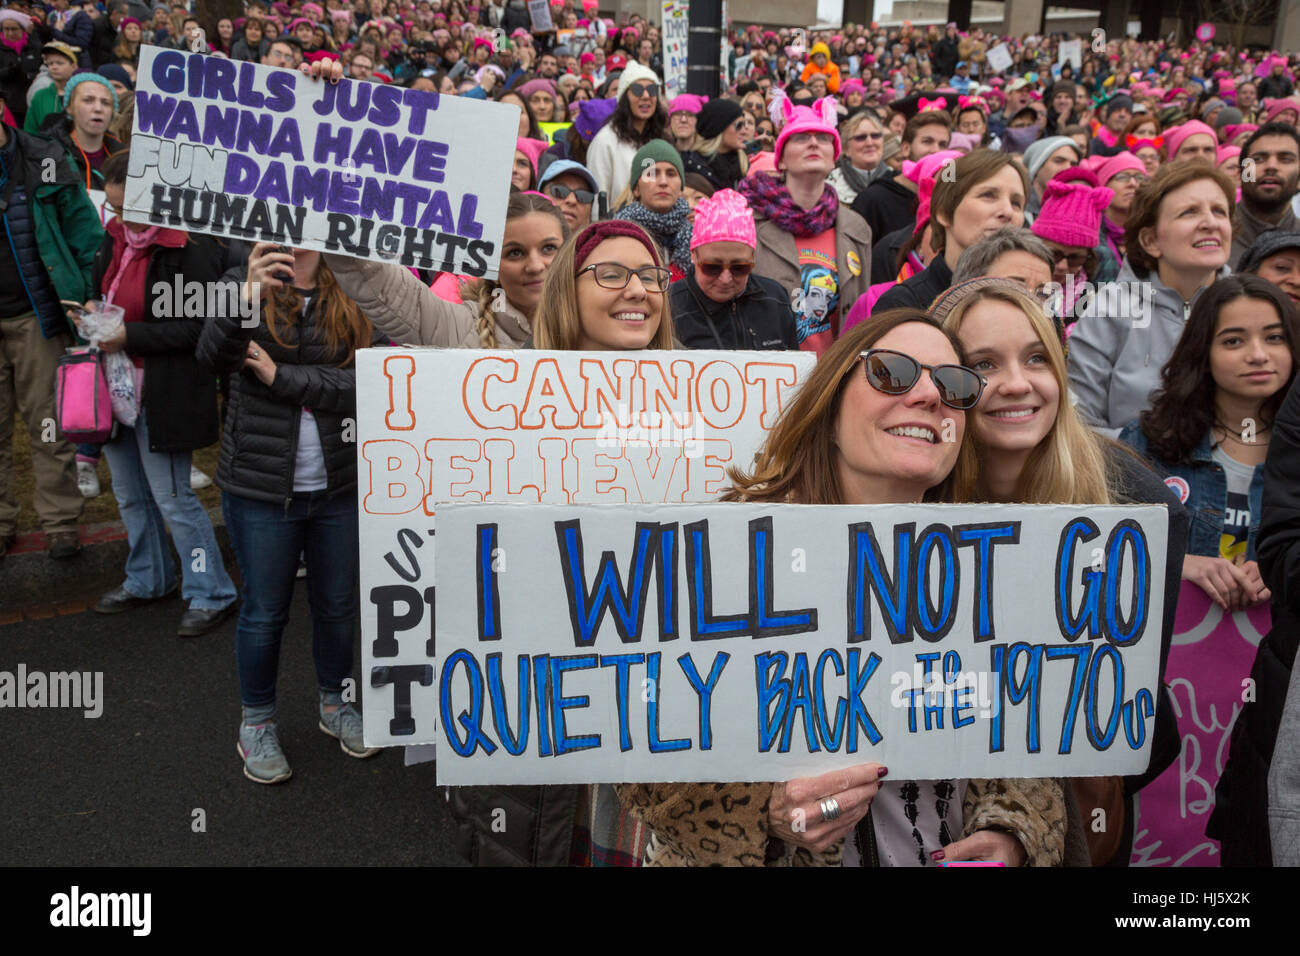 Washington, DC USA - 21 January 2017 - The Women's March on Washington drew an estimated half million to the nation's capitol to protest President Donald Trump. It was a far larger crowd than had witnessed his inauguration the previous day. Credit: Jim West/Alamy Live News Stock Photo